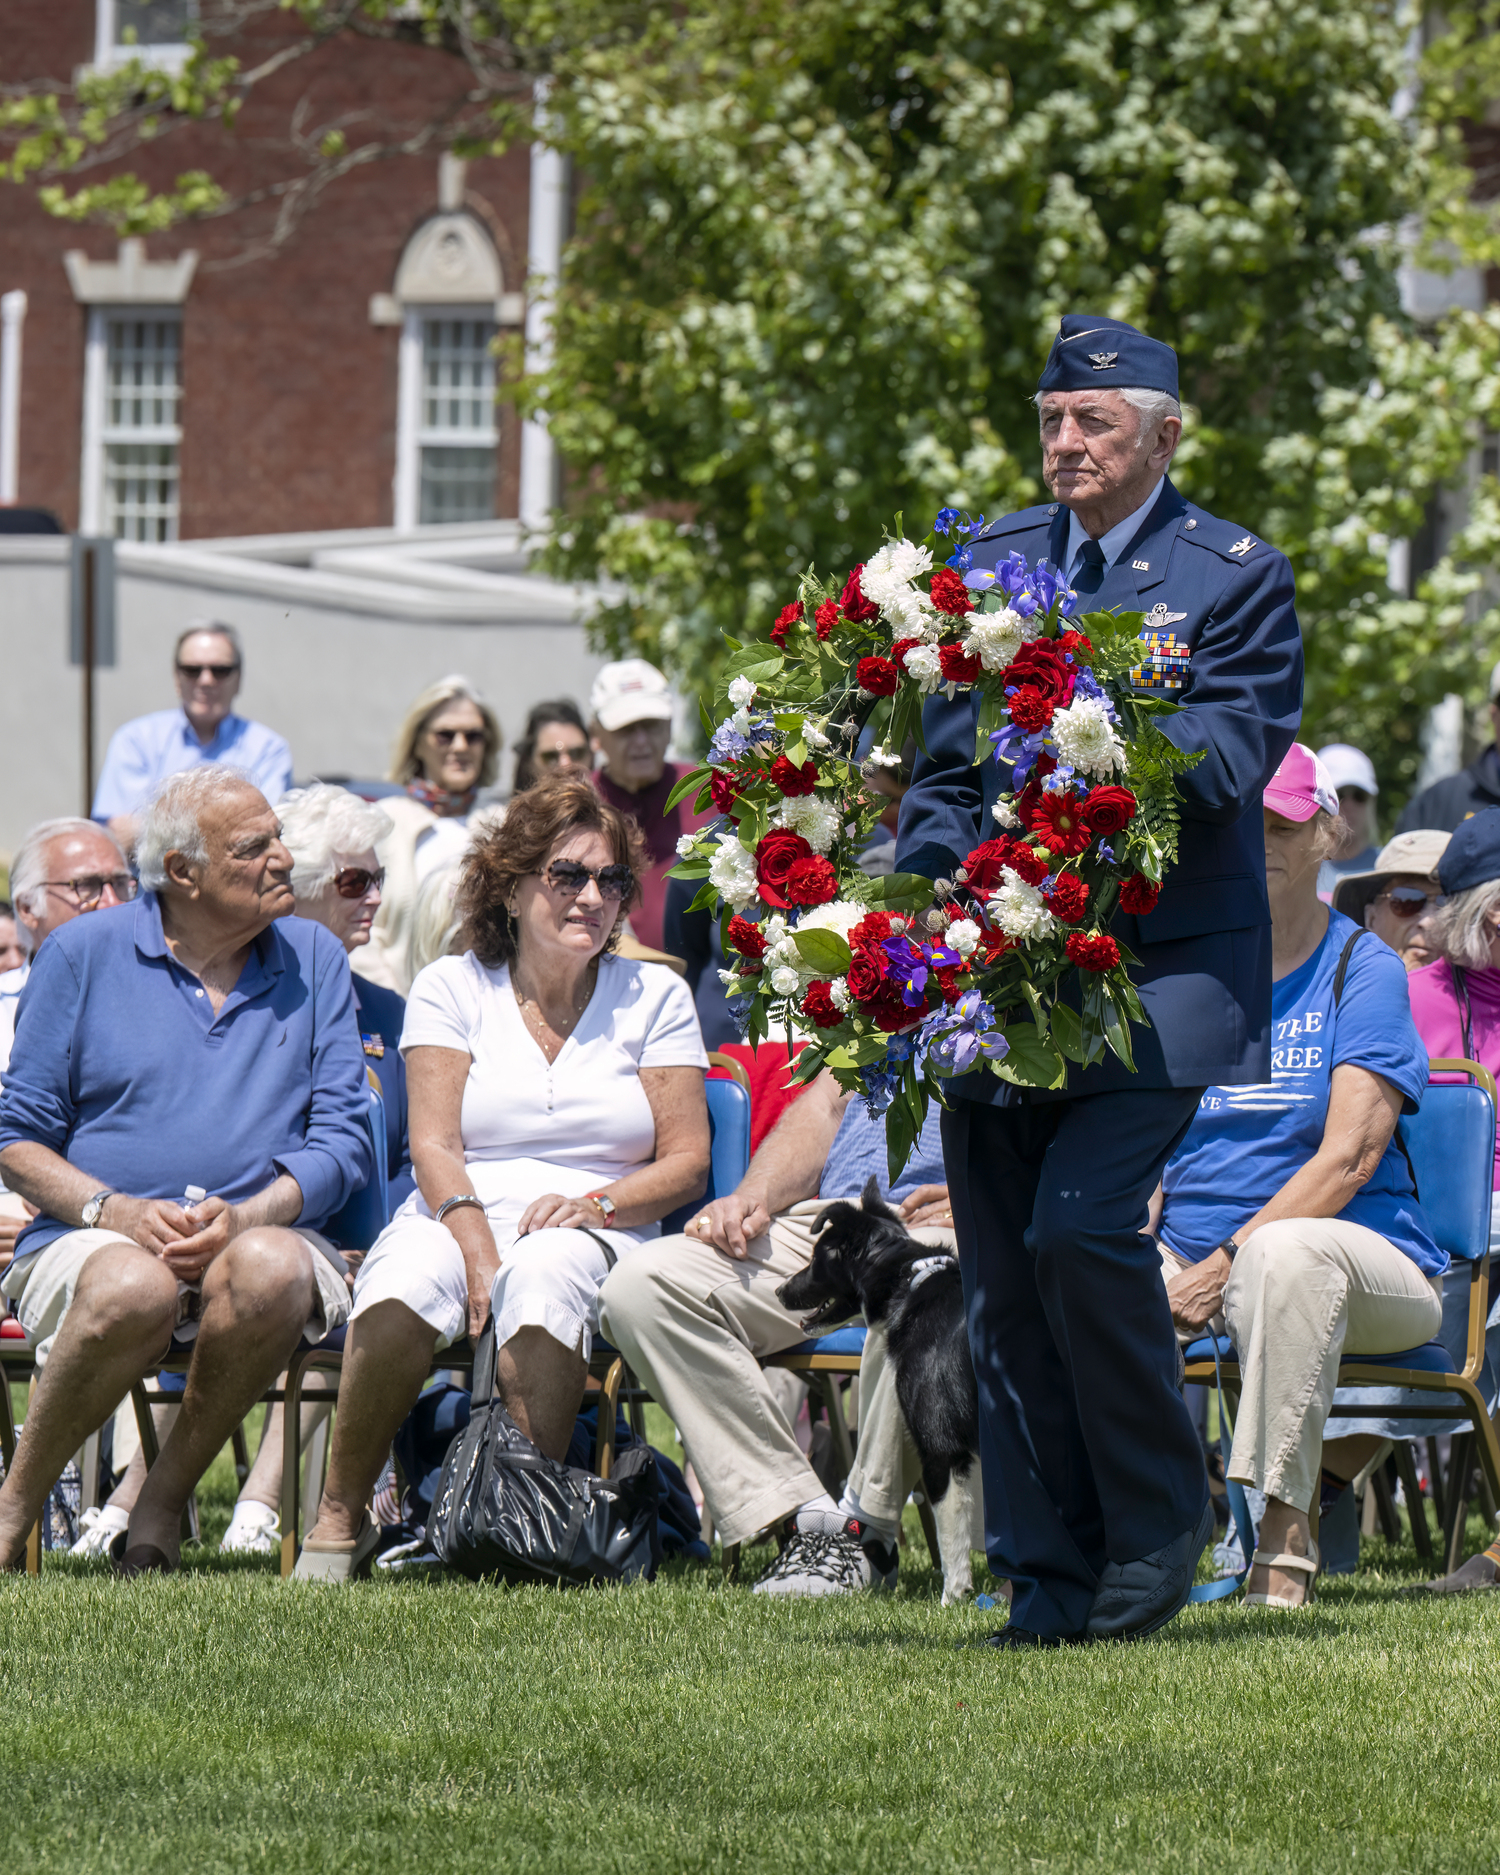 Robert Grisnik places a wreath during the Memorial Day service in Agawam Park in Southampton village on Monday.